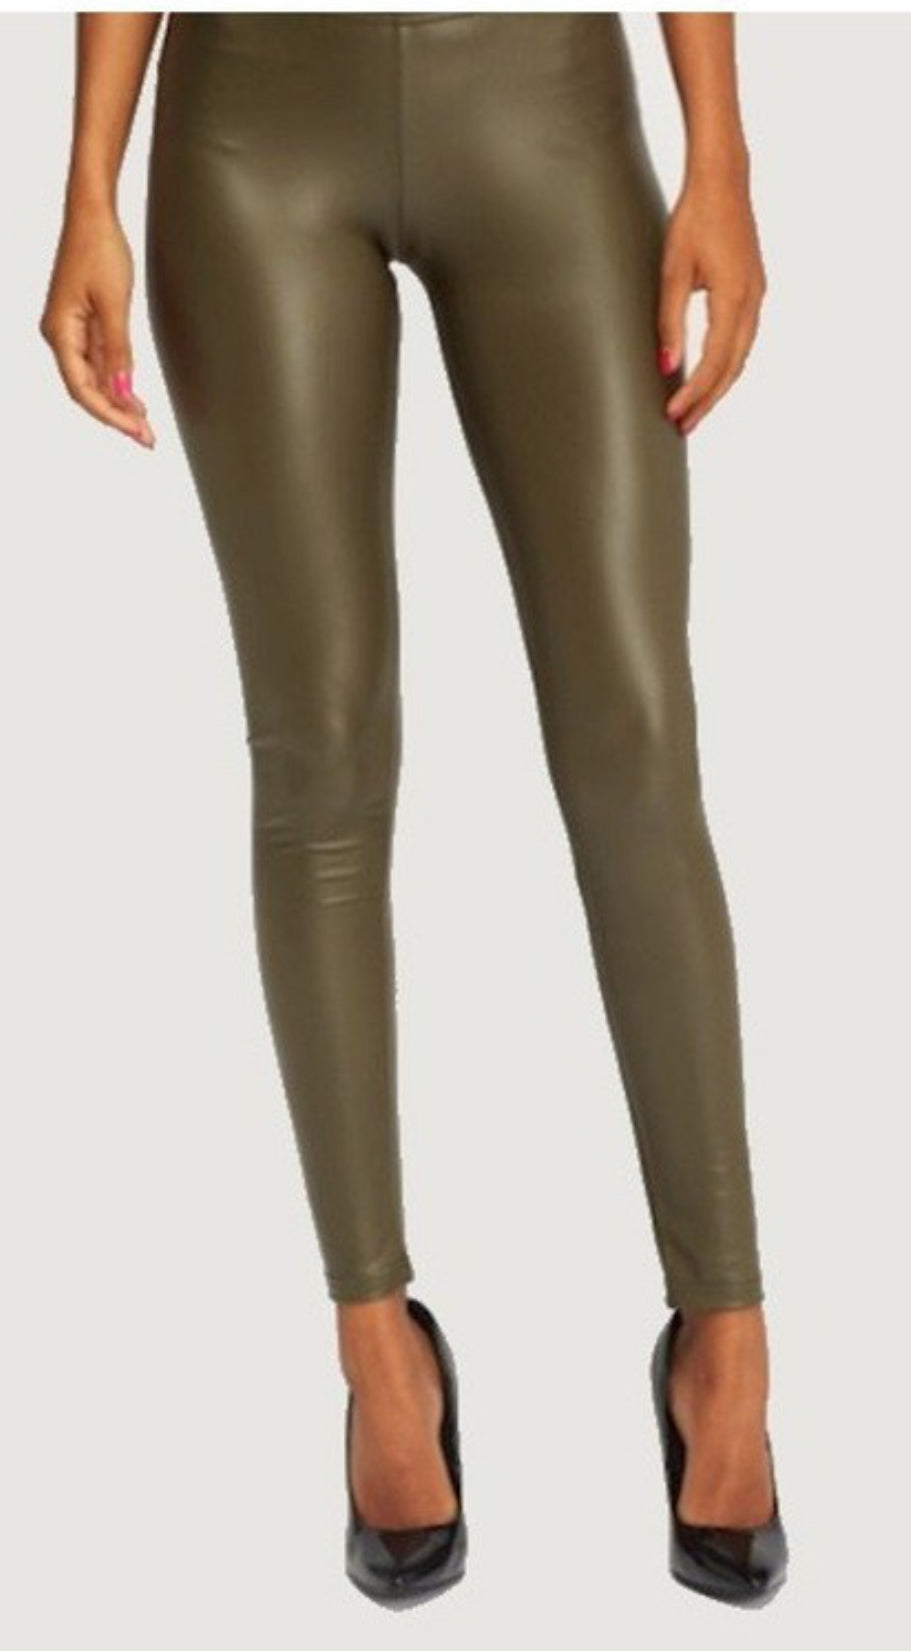 Olive faux leather leggings hey